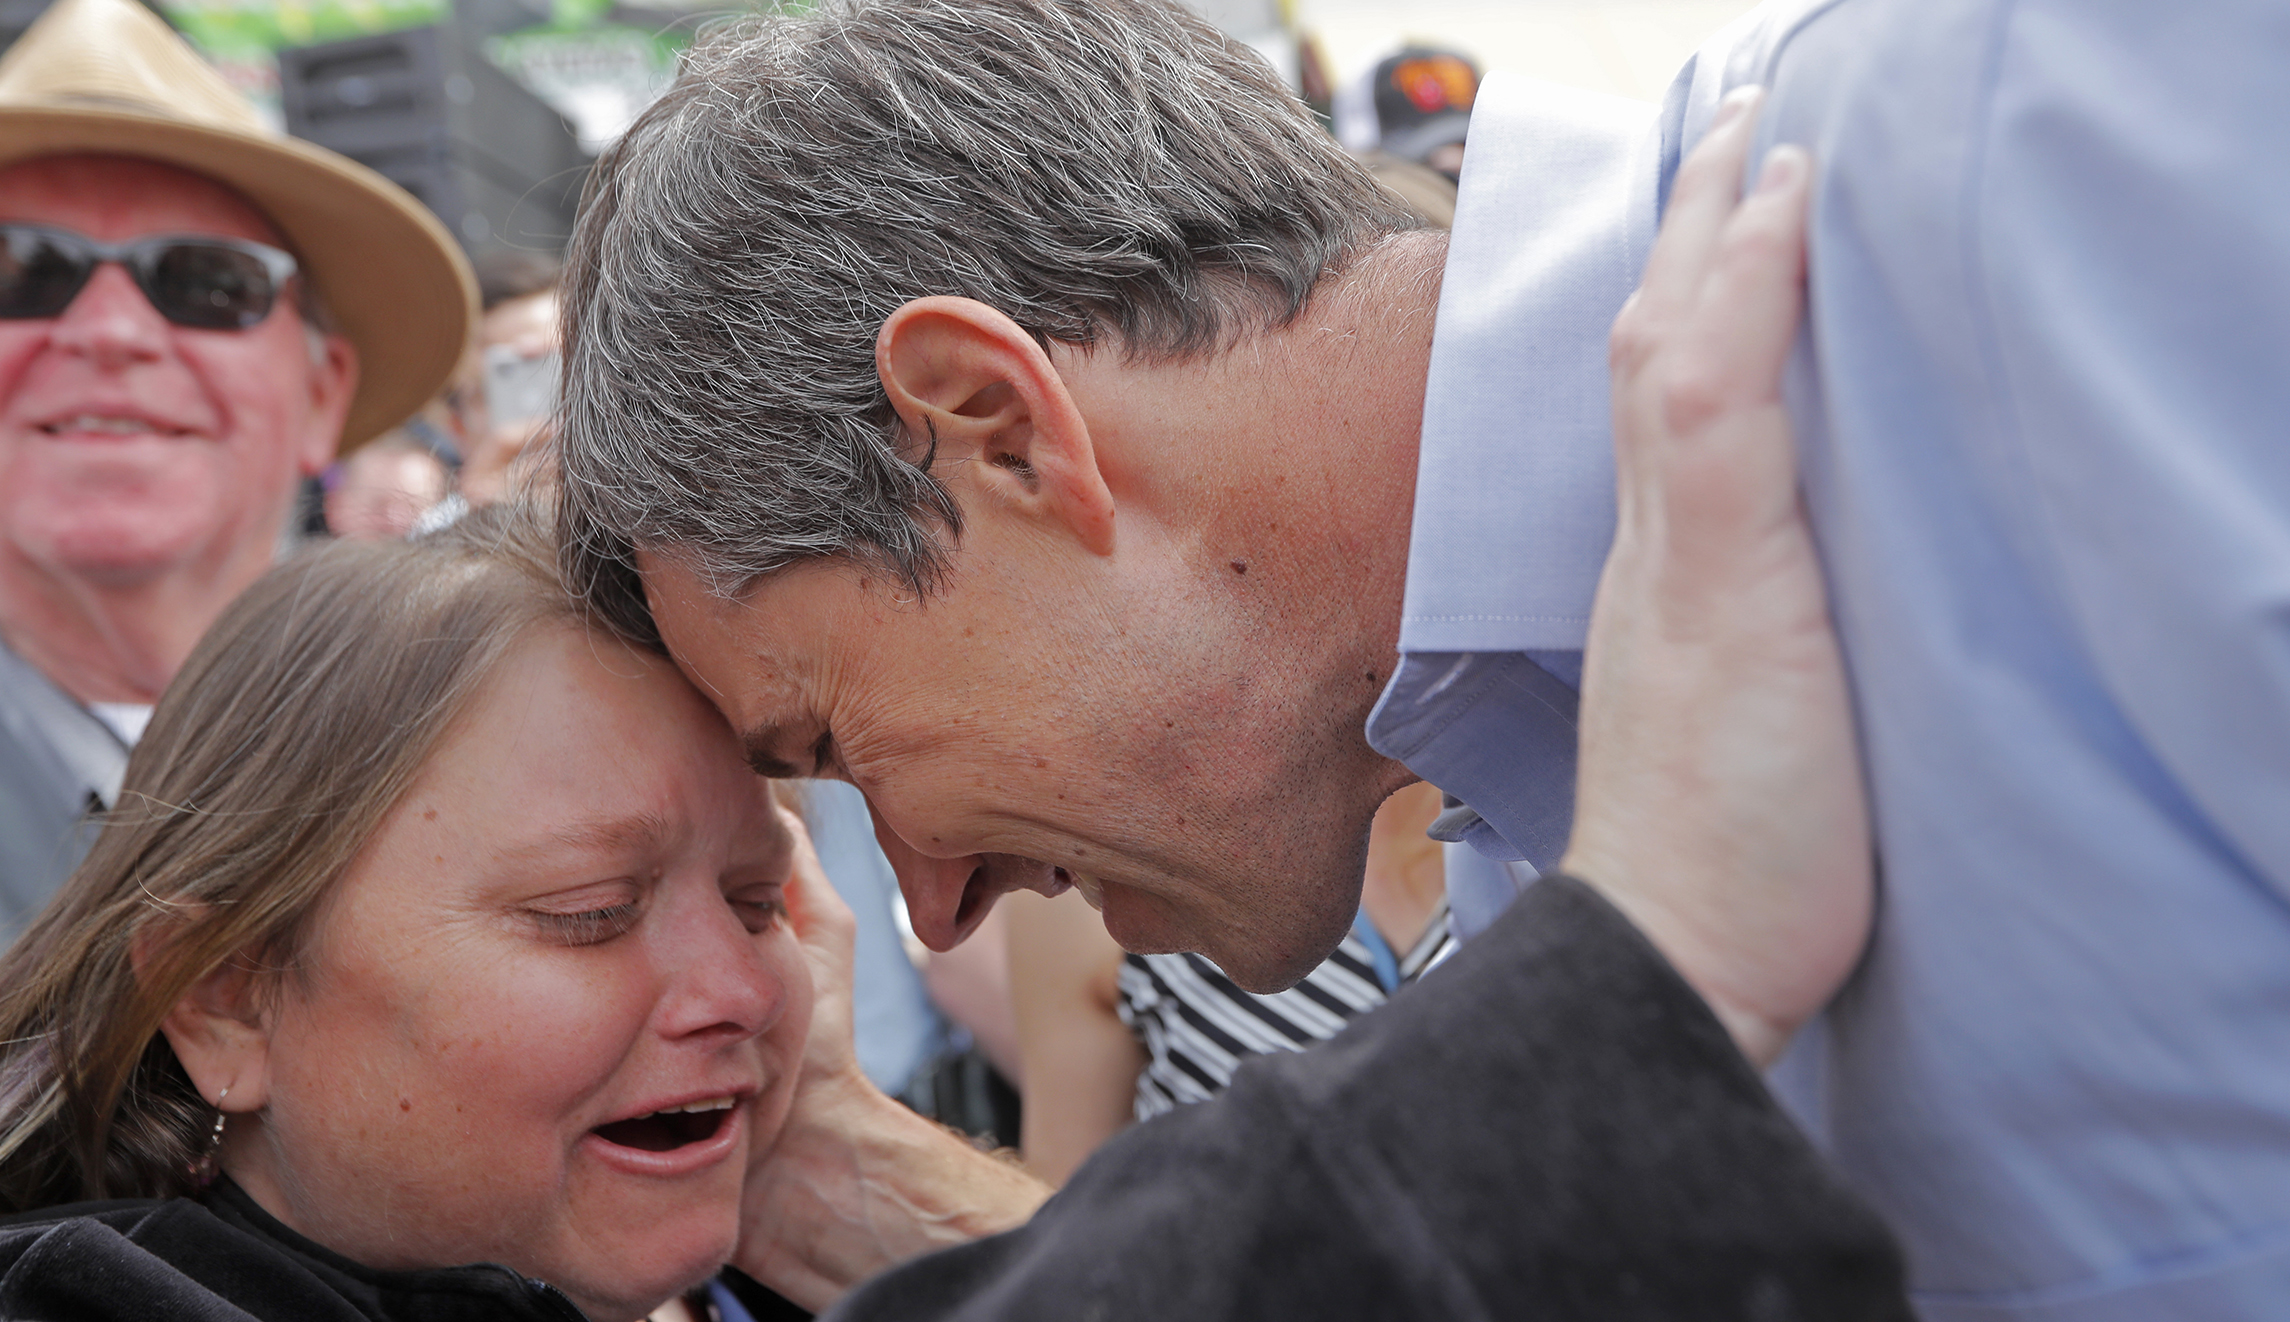 Democratic presidential candidate and former Texas congressman Beto O'Rourke hugs his younger sister Erin O'Rourke after speaking at his presidential campaign kickoff in El Paso, Texas, Saturday, March 30, 2019. (AP Photo/Gerald Herbert)